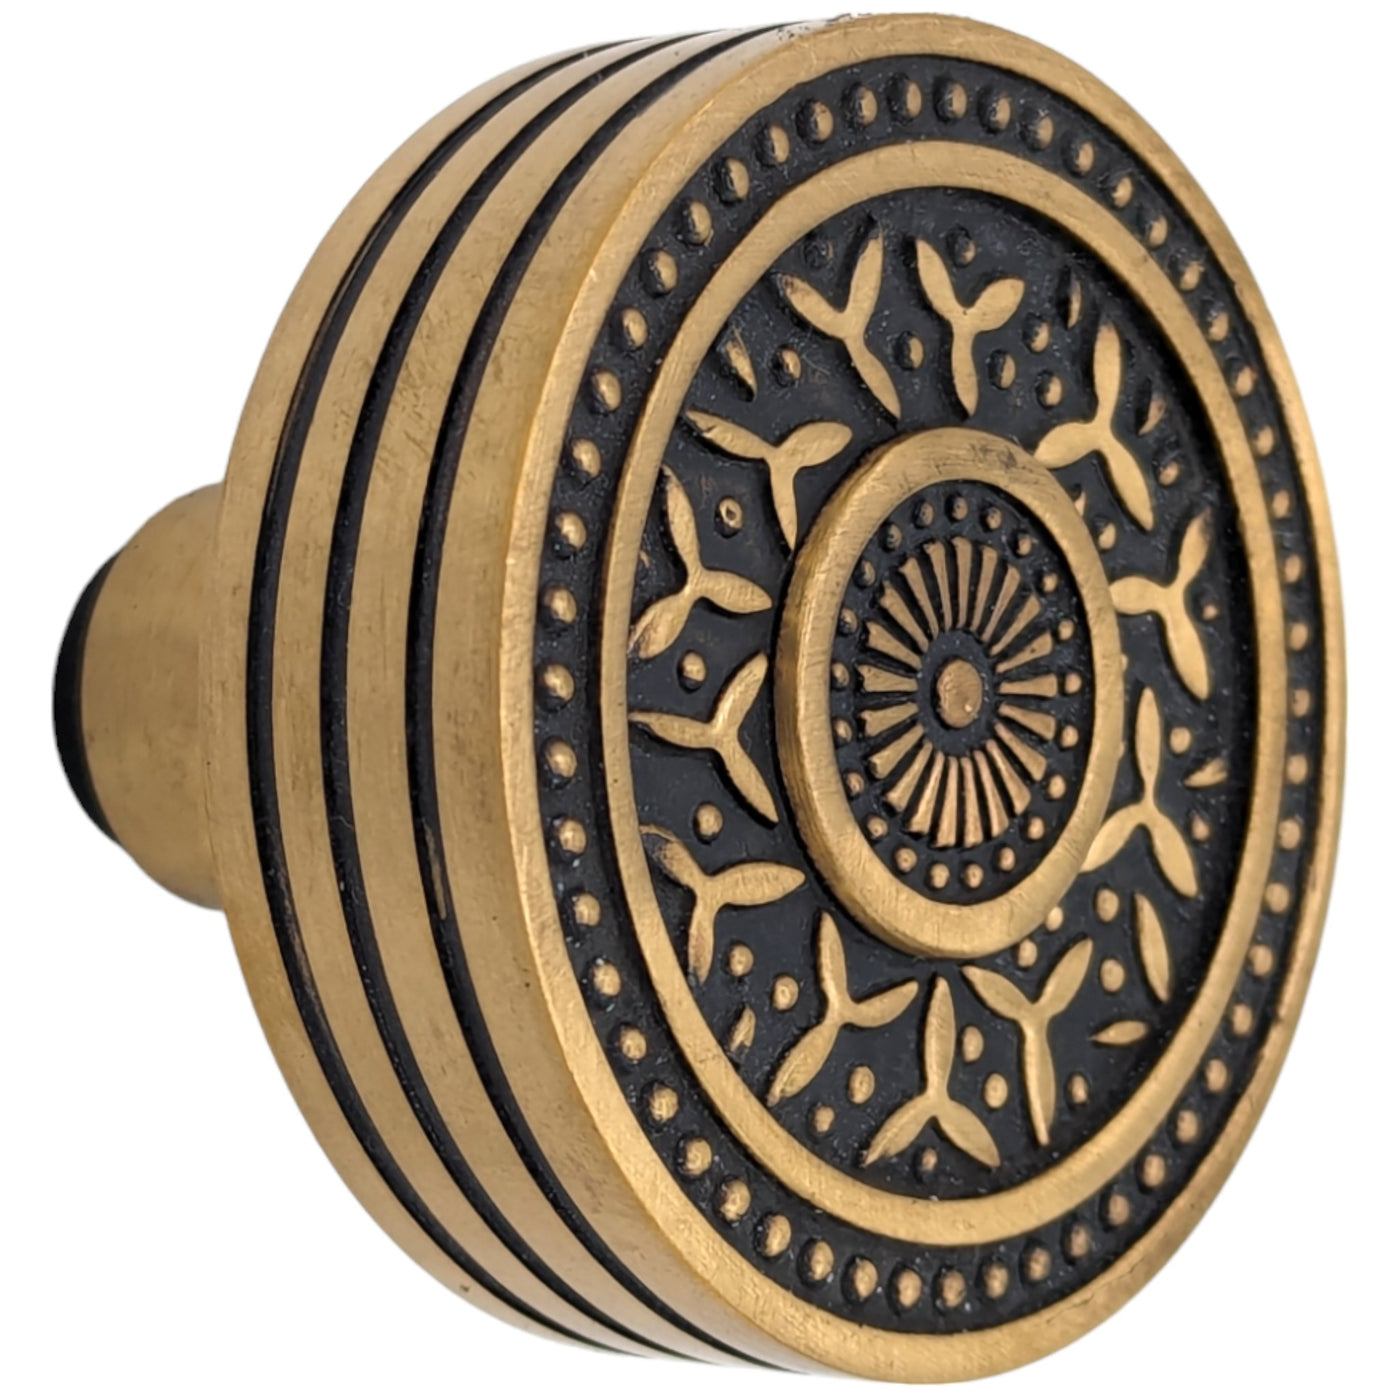 Rice Pattern Solid Brass Spare Door Knob Set (Several Finishes Available)